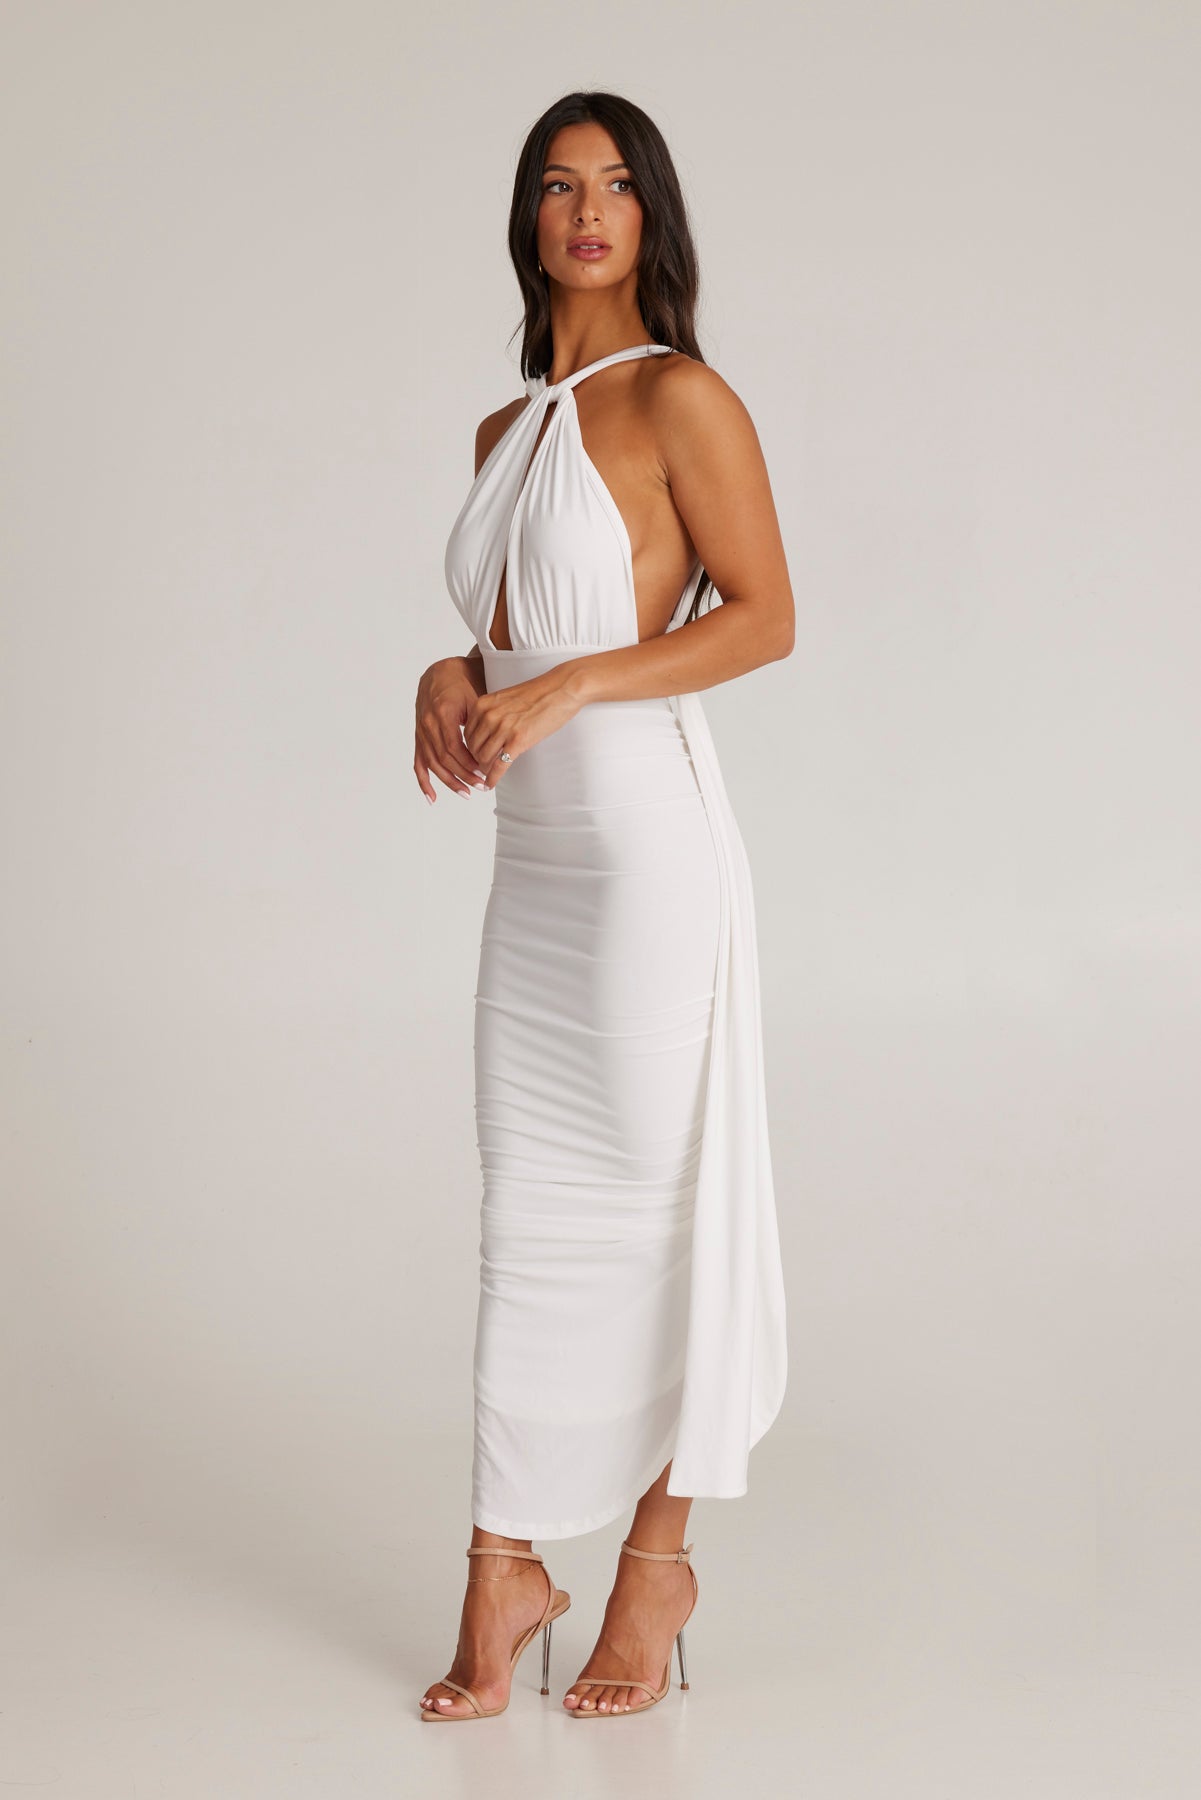 MÉLANI The Label MELROSE White Multi Tie Plunge Form Fitted Midi Dress